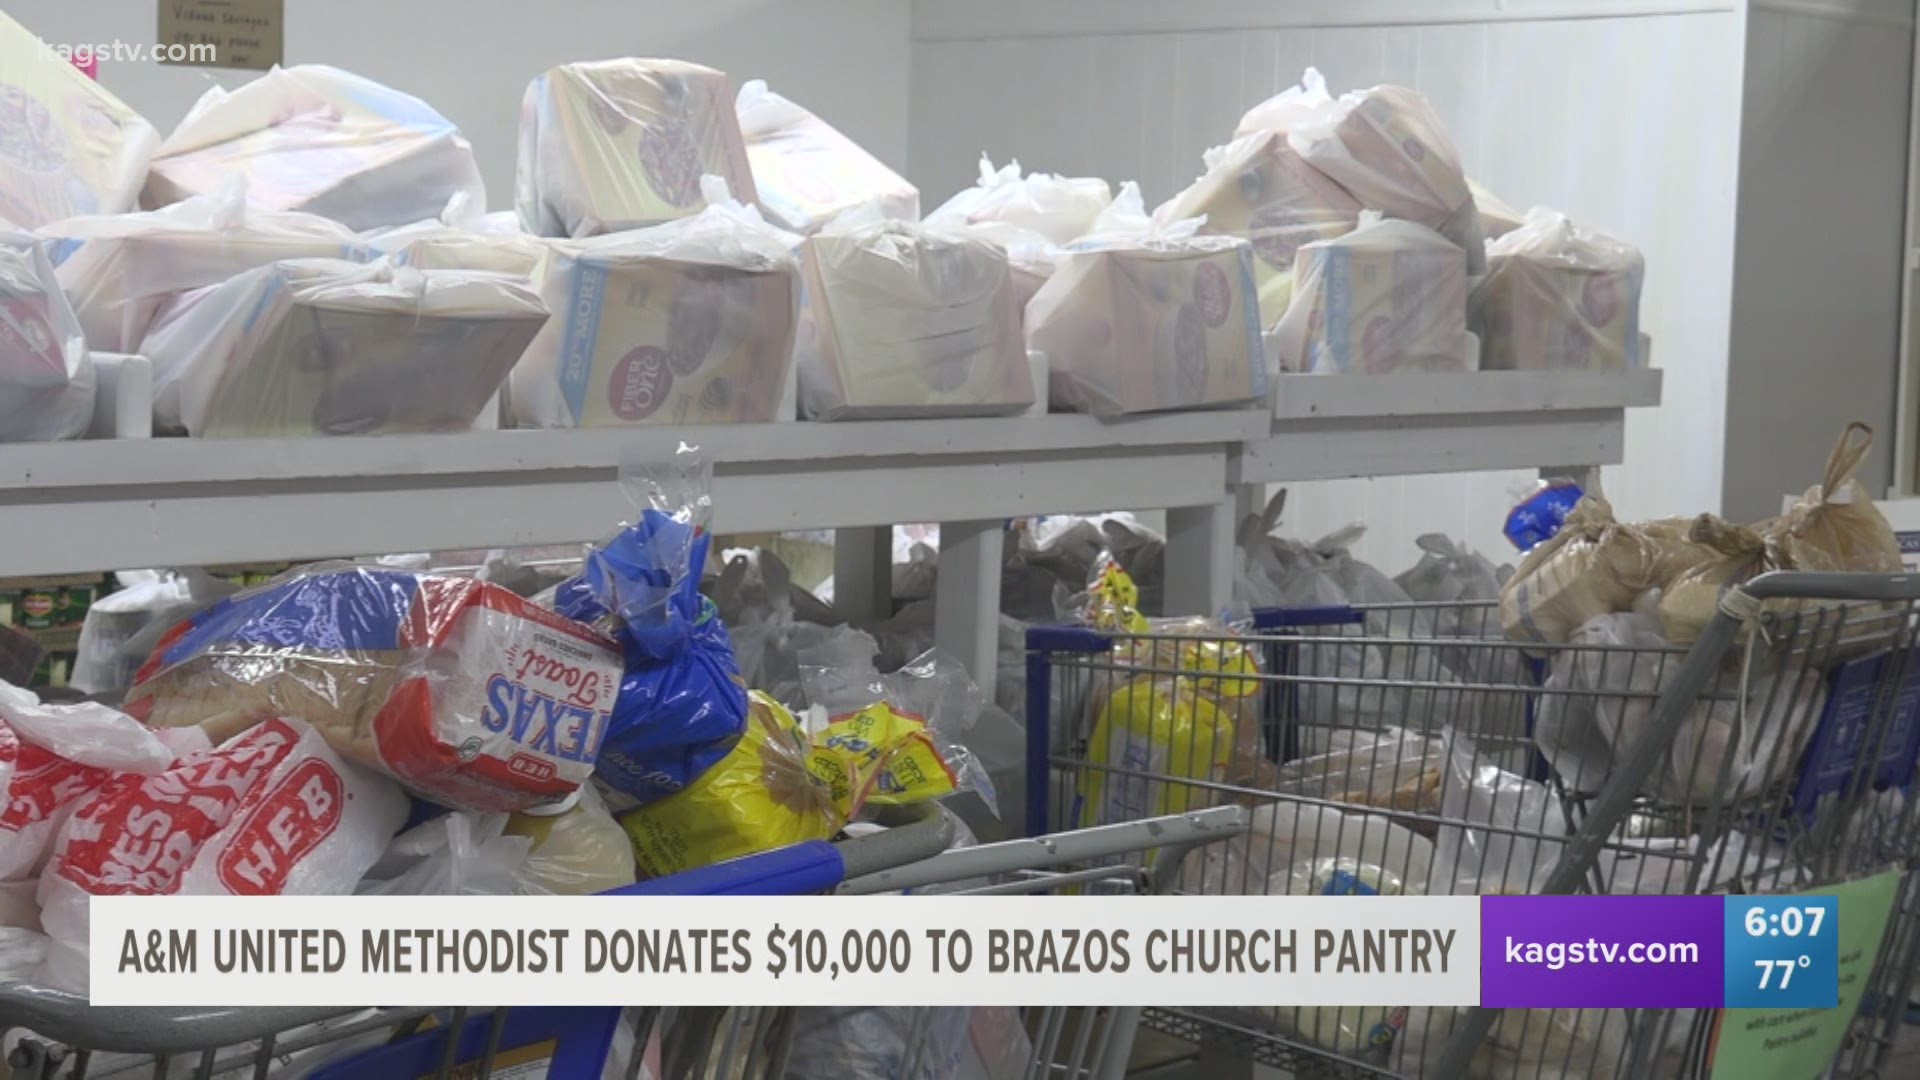 The extra money will help the local pantry continue feeding the community on a daily basis.